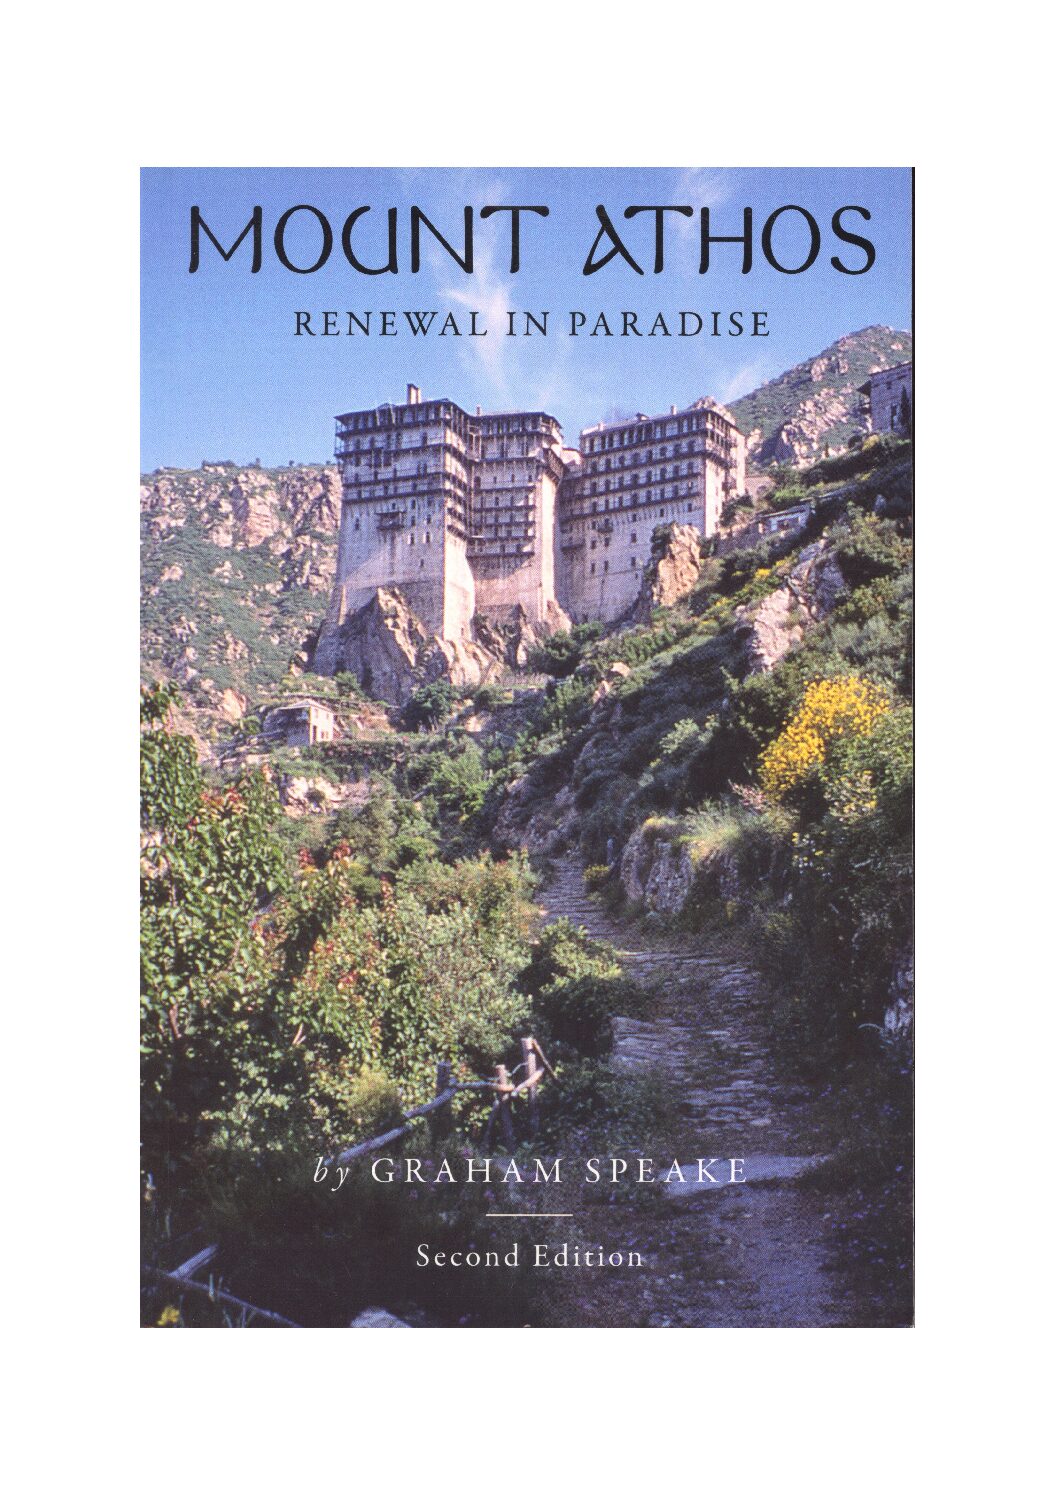 Mount Athos: Renewal in Paradise. By Graham Speake. Second Edition